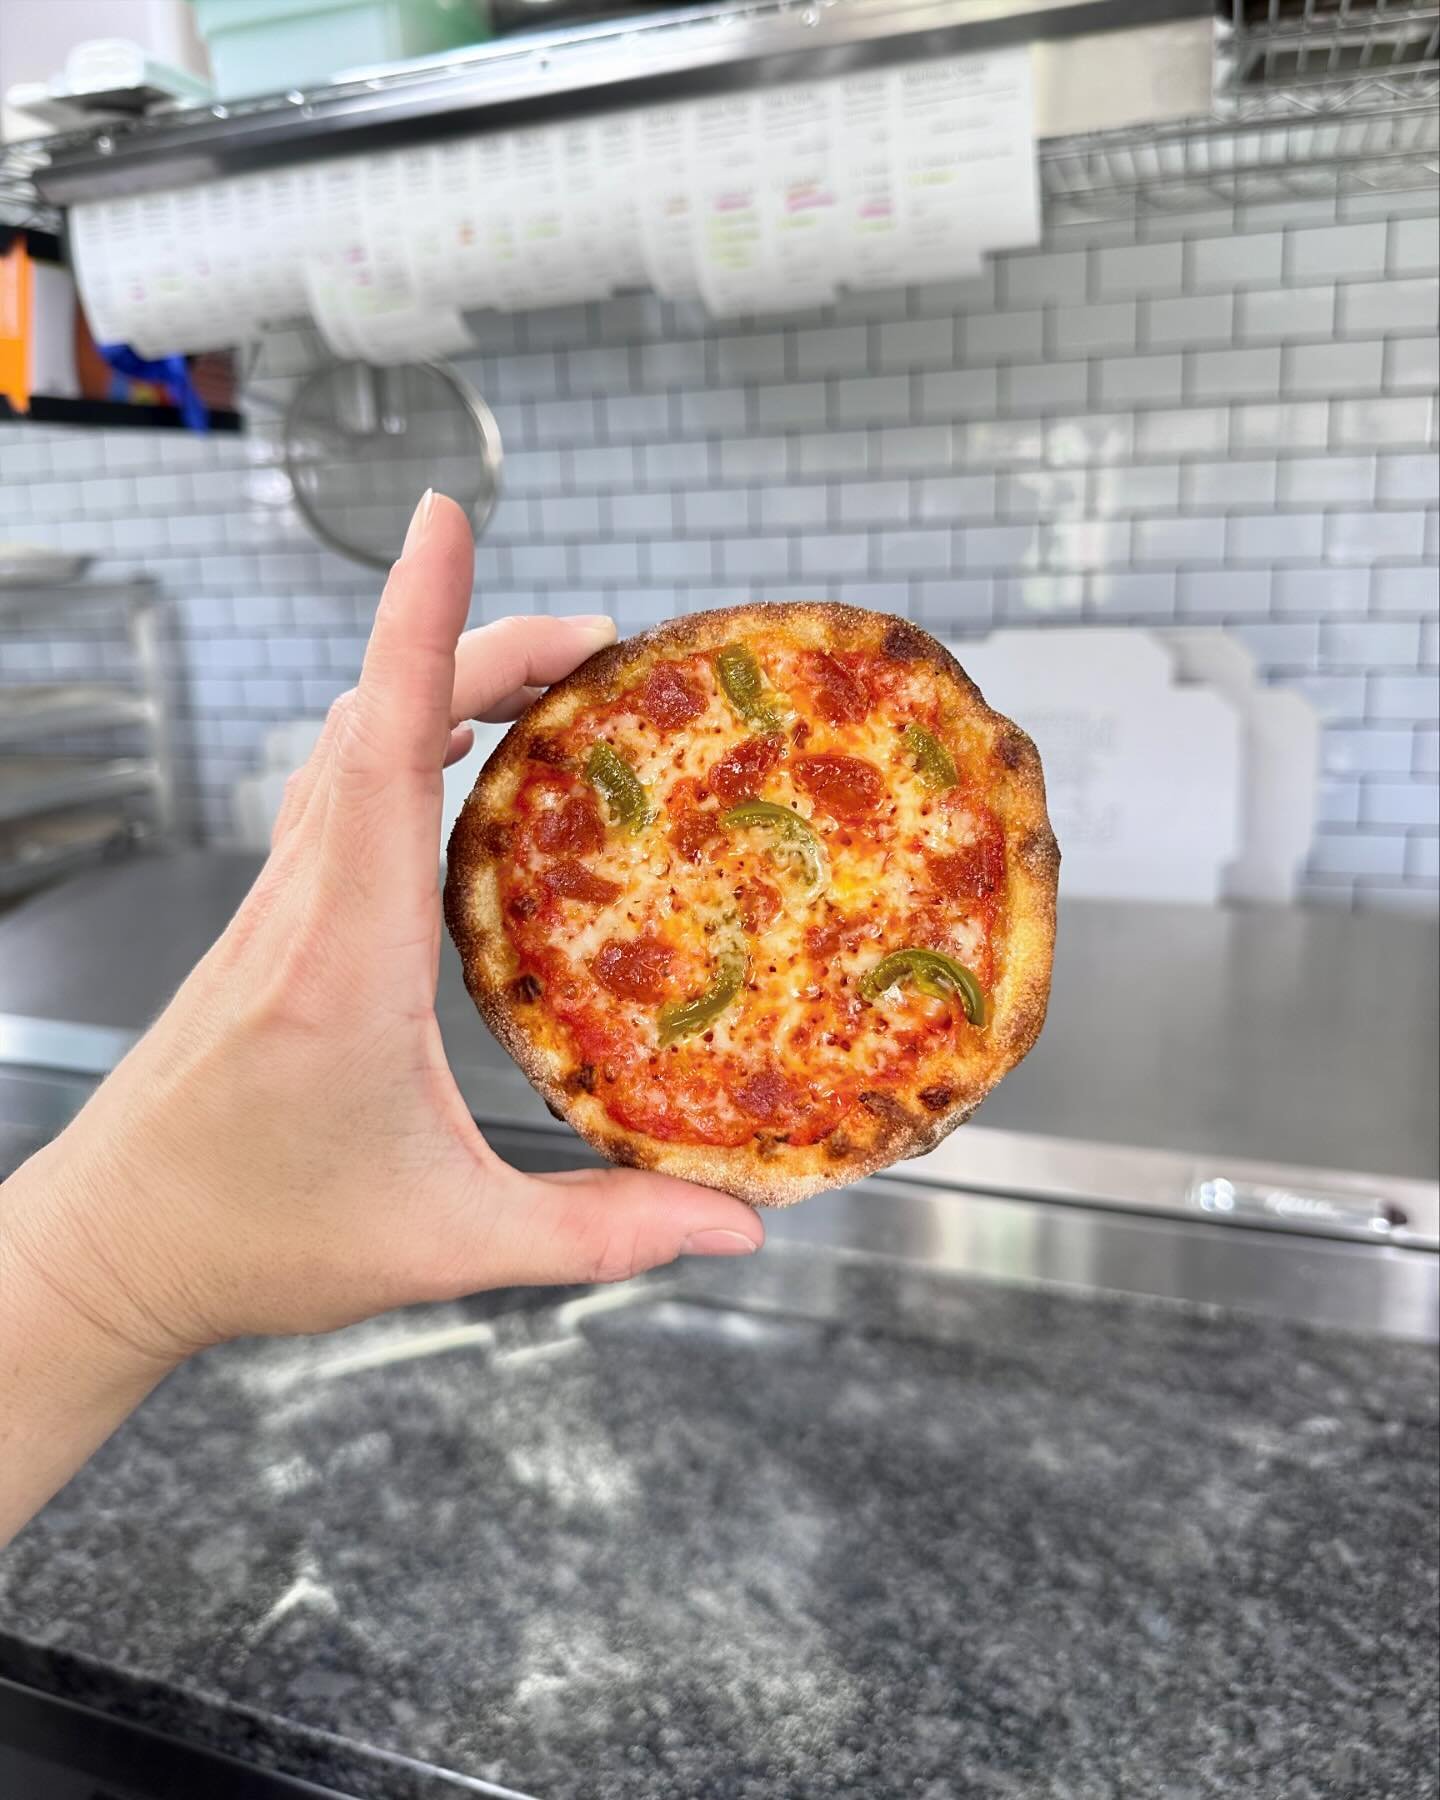 🦈THE TINIEST ANKLE BITER&hellip;.

🌳Happy 420 - hope ya&rsquo;ll enjoy your day😶&zwj;🌫️! Order some pies {while we&rsquo;ve got &lsquo;em} for when those snackies kick in 😎
.
.
.
#feralpizza #feralpizzaatx #austinpizza #atxpizza #pizzaatx #atxfo